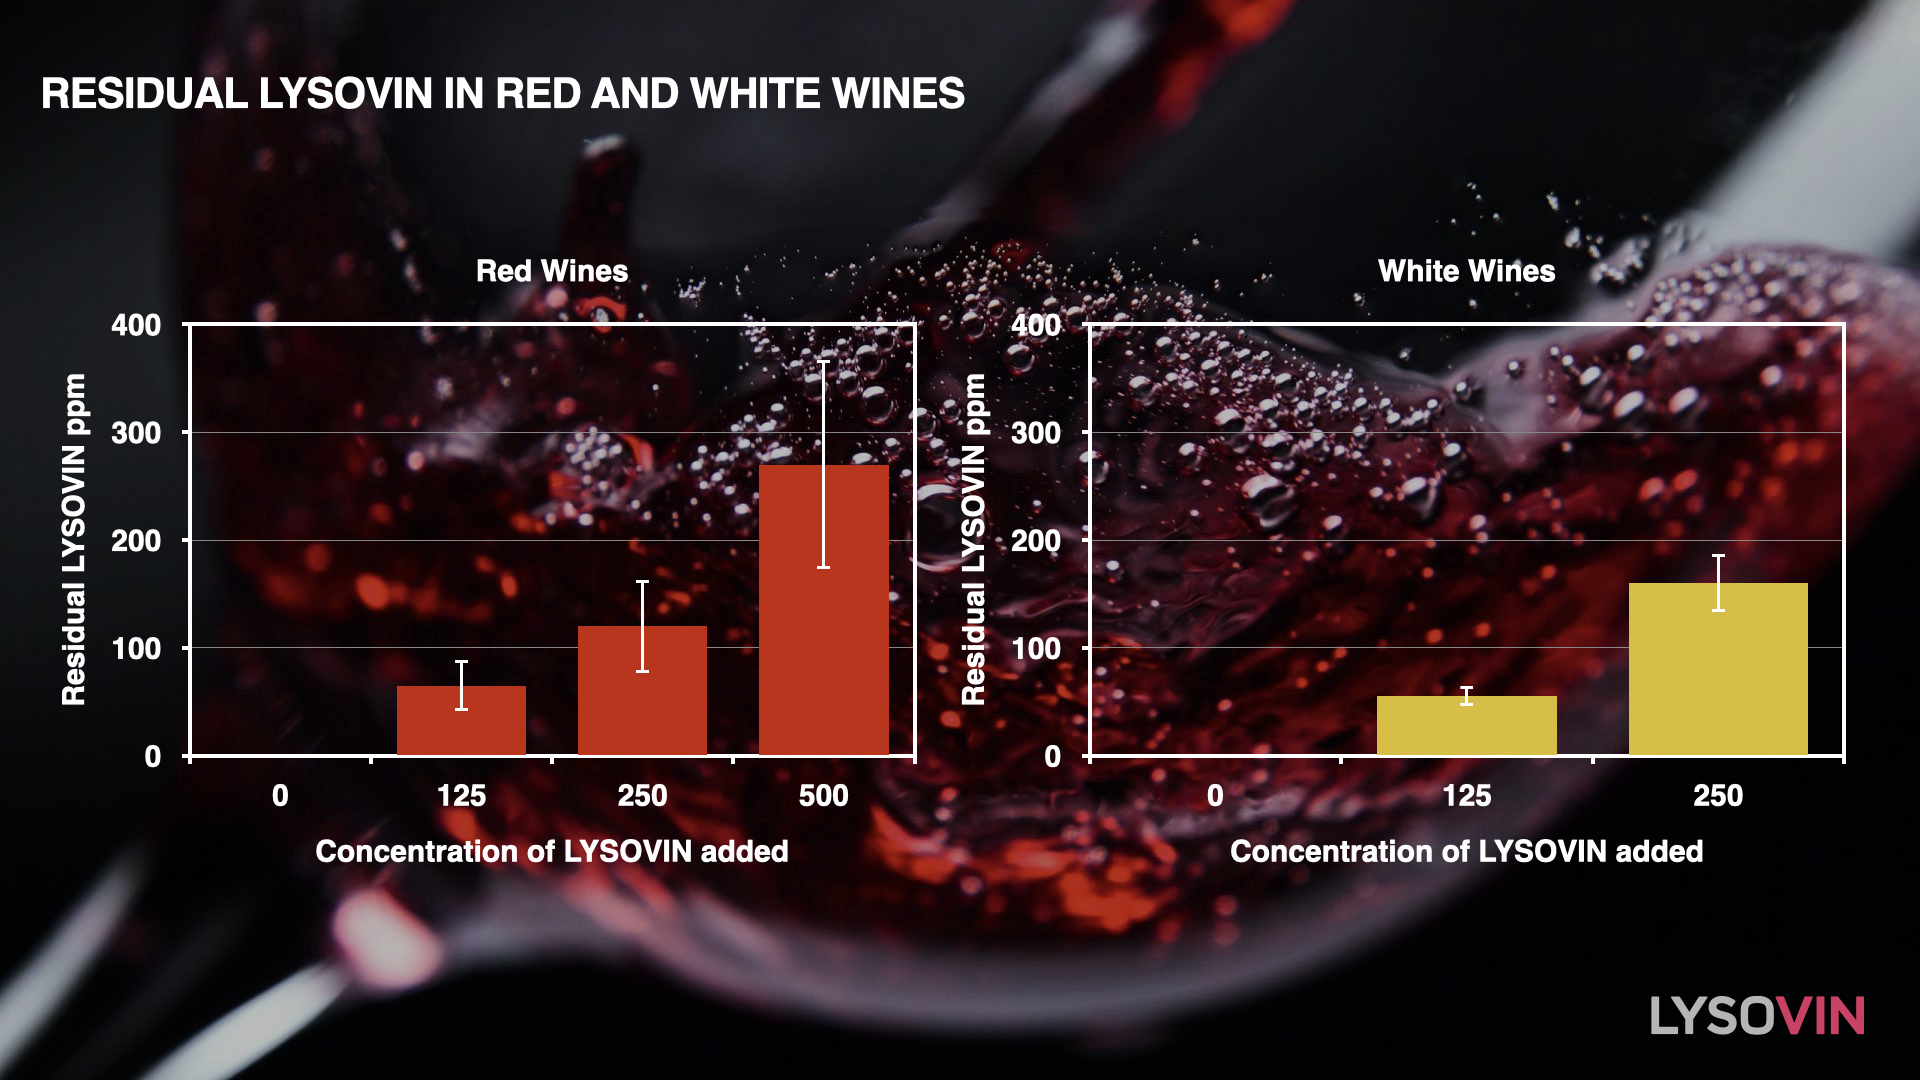 Lysovin: Residual Lysovin in red and white wines